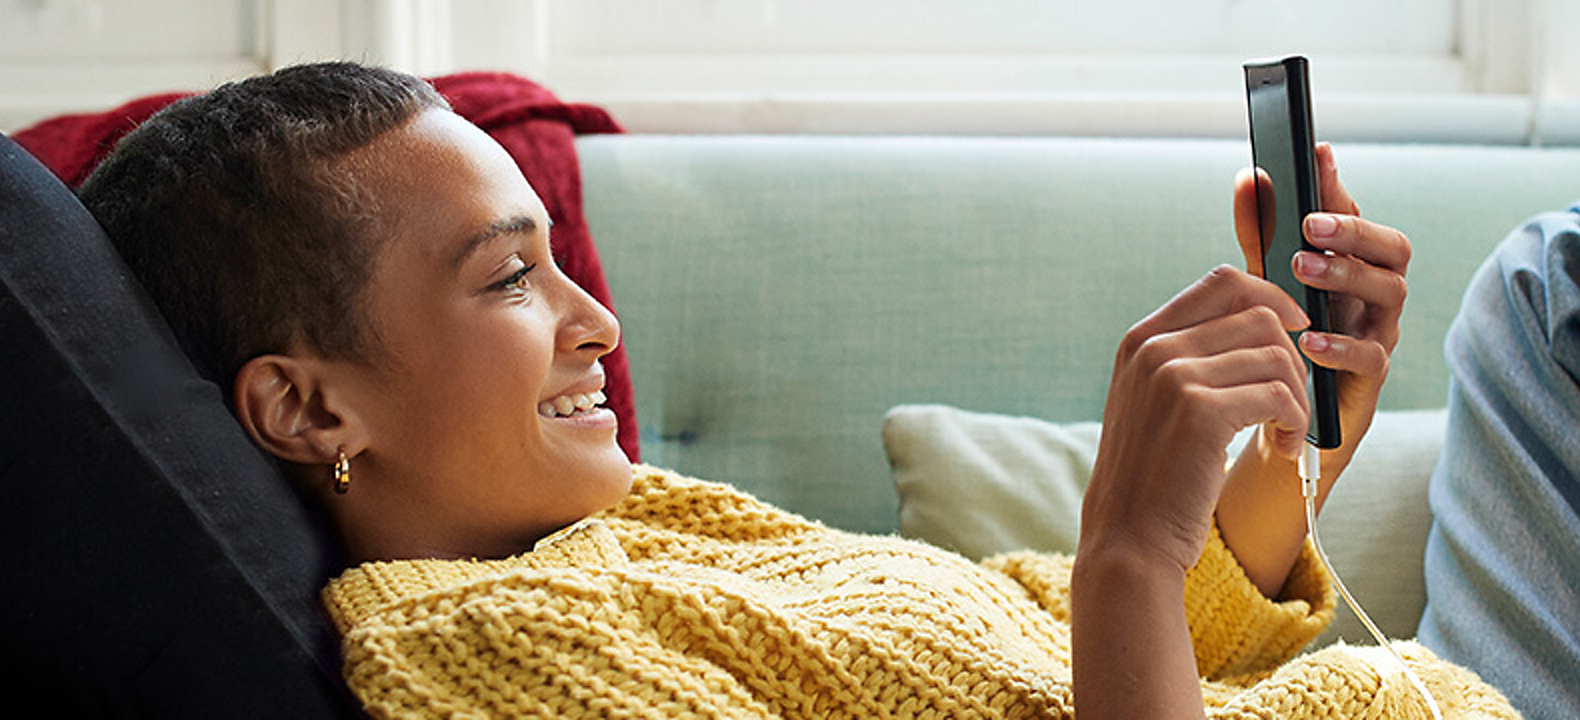 A woman lounging on a couch as she smiles at her phone